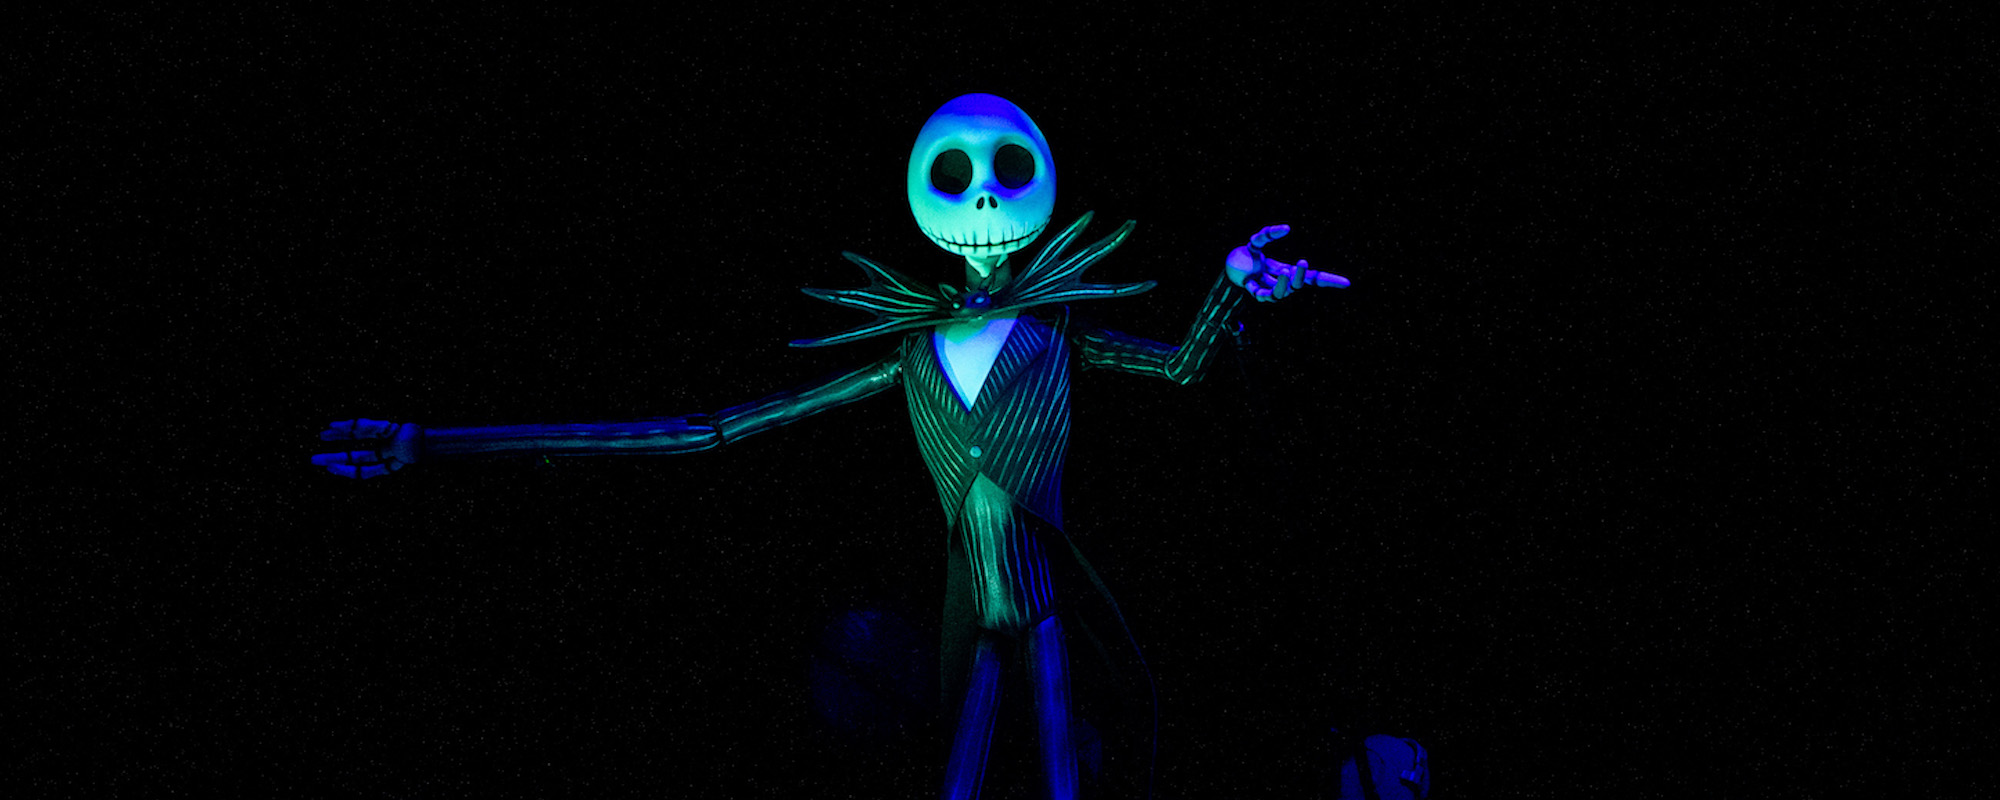 The Making of Danny Elfman’s ‘The Nightmare Before Christmas’ Song “What’s This?”